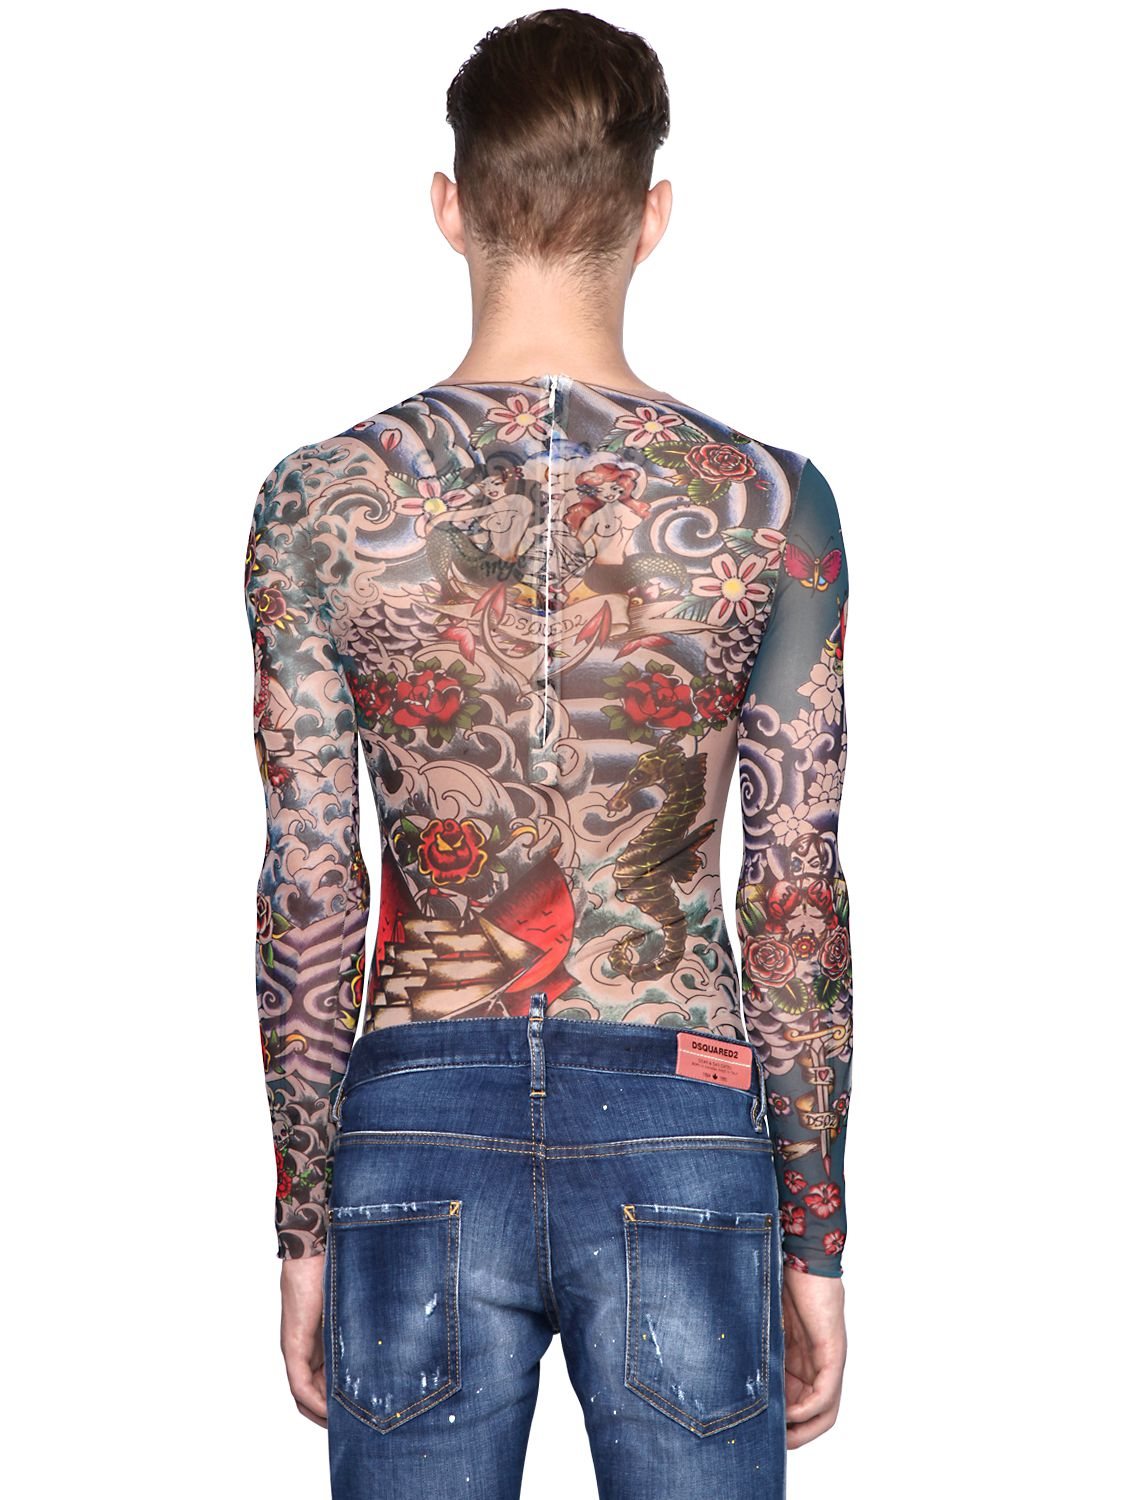 DSquared² Tattoo Printed Sheer Long Sleeve T-shirt for Men - Lyst